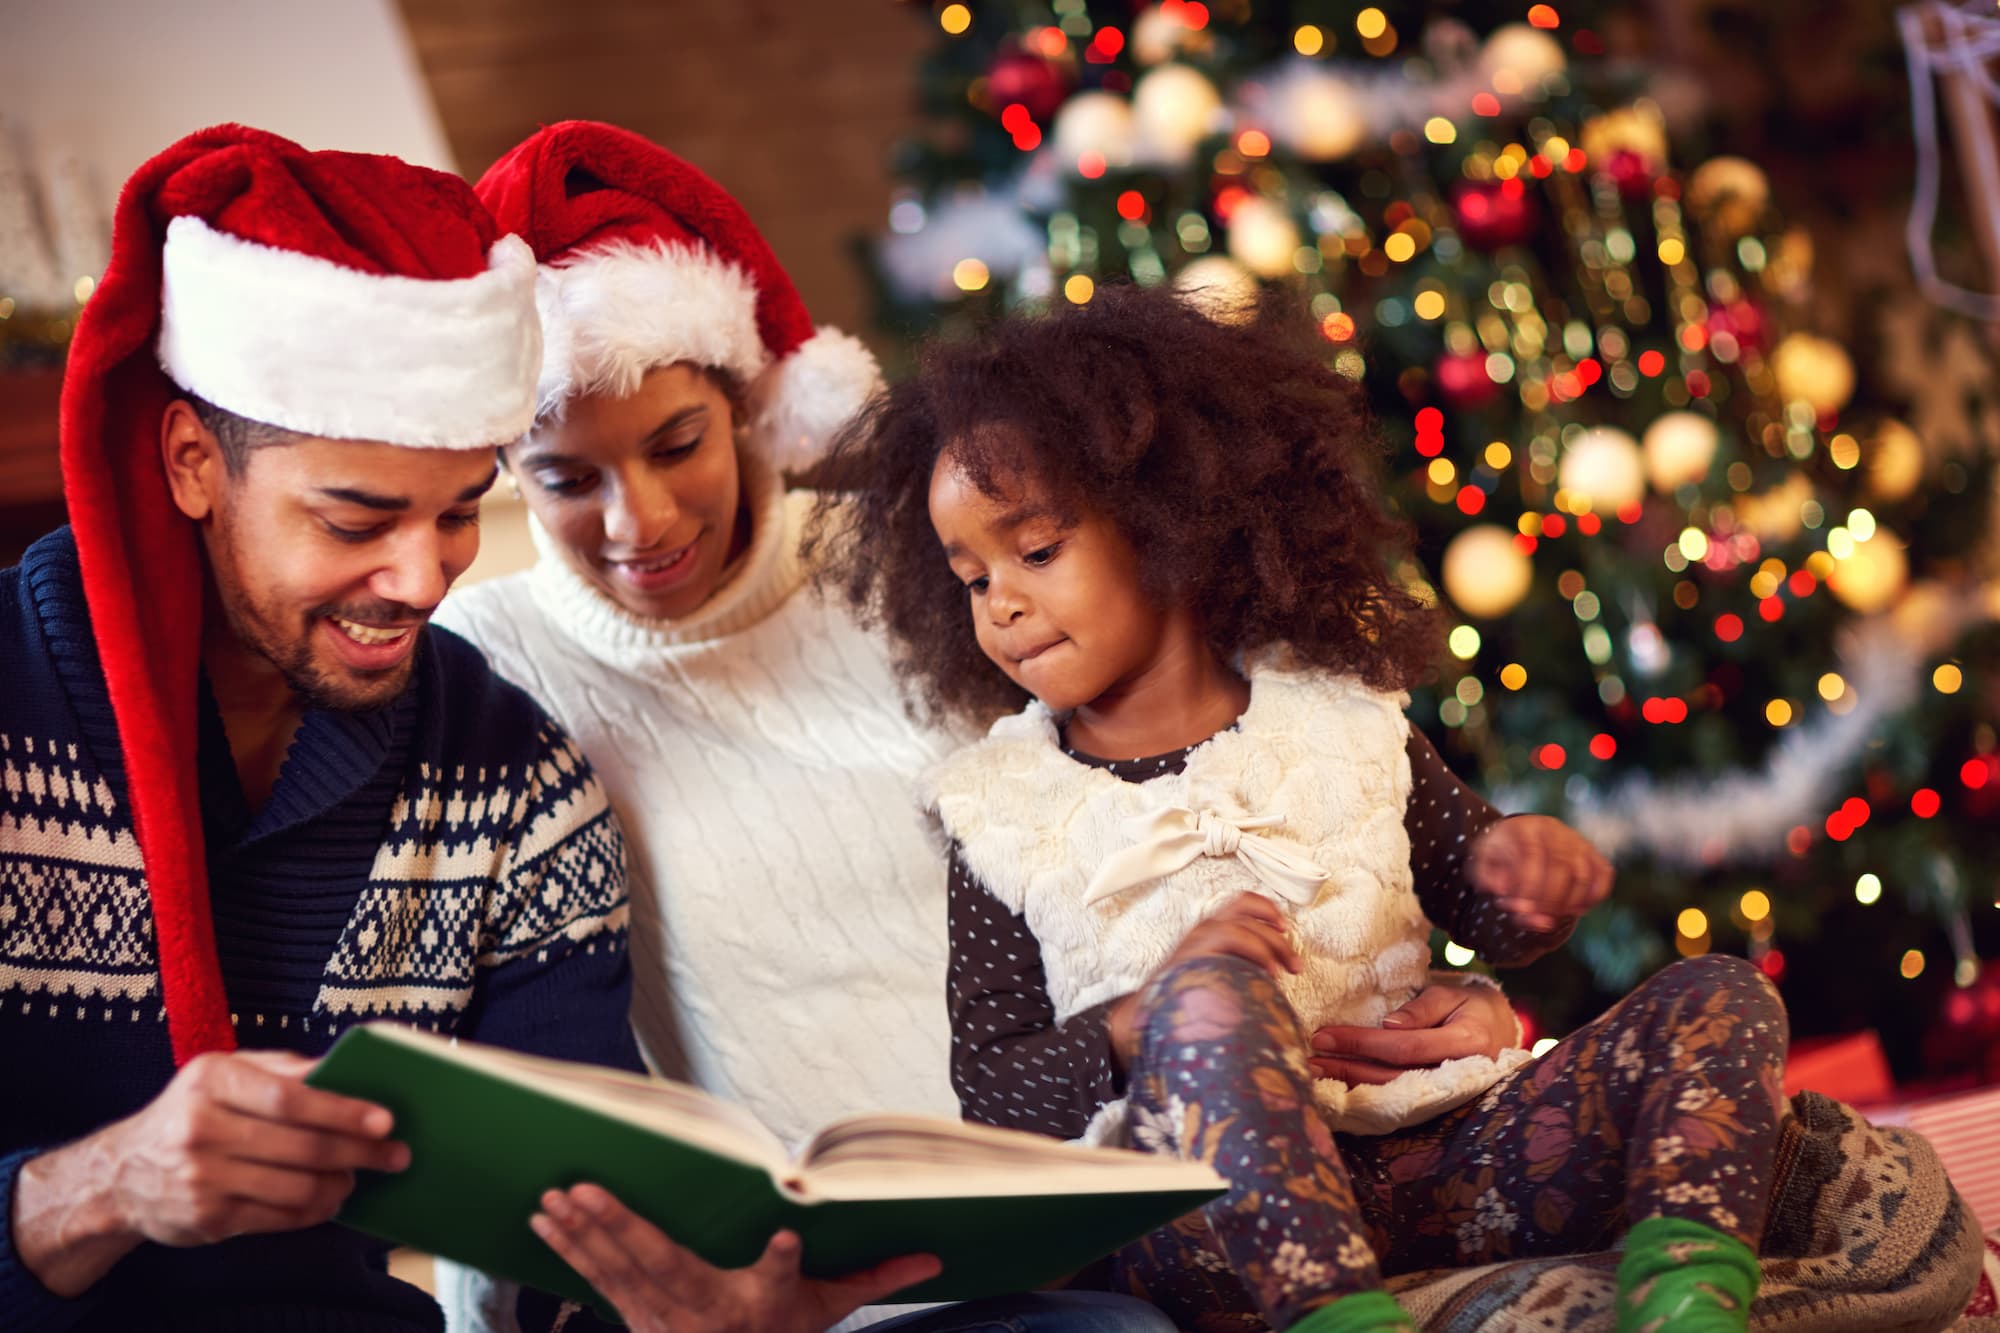 A family reads a Christmas book together while seated in front of an illuminated Christmas tree.